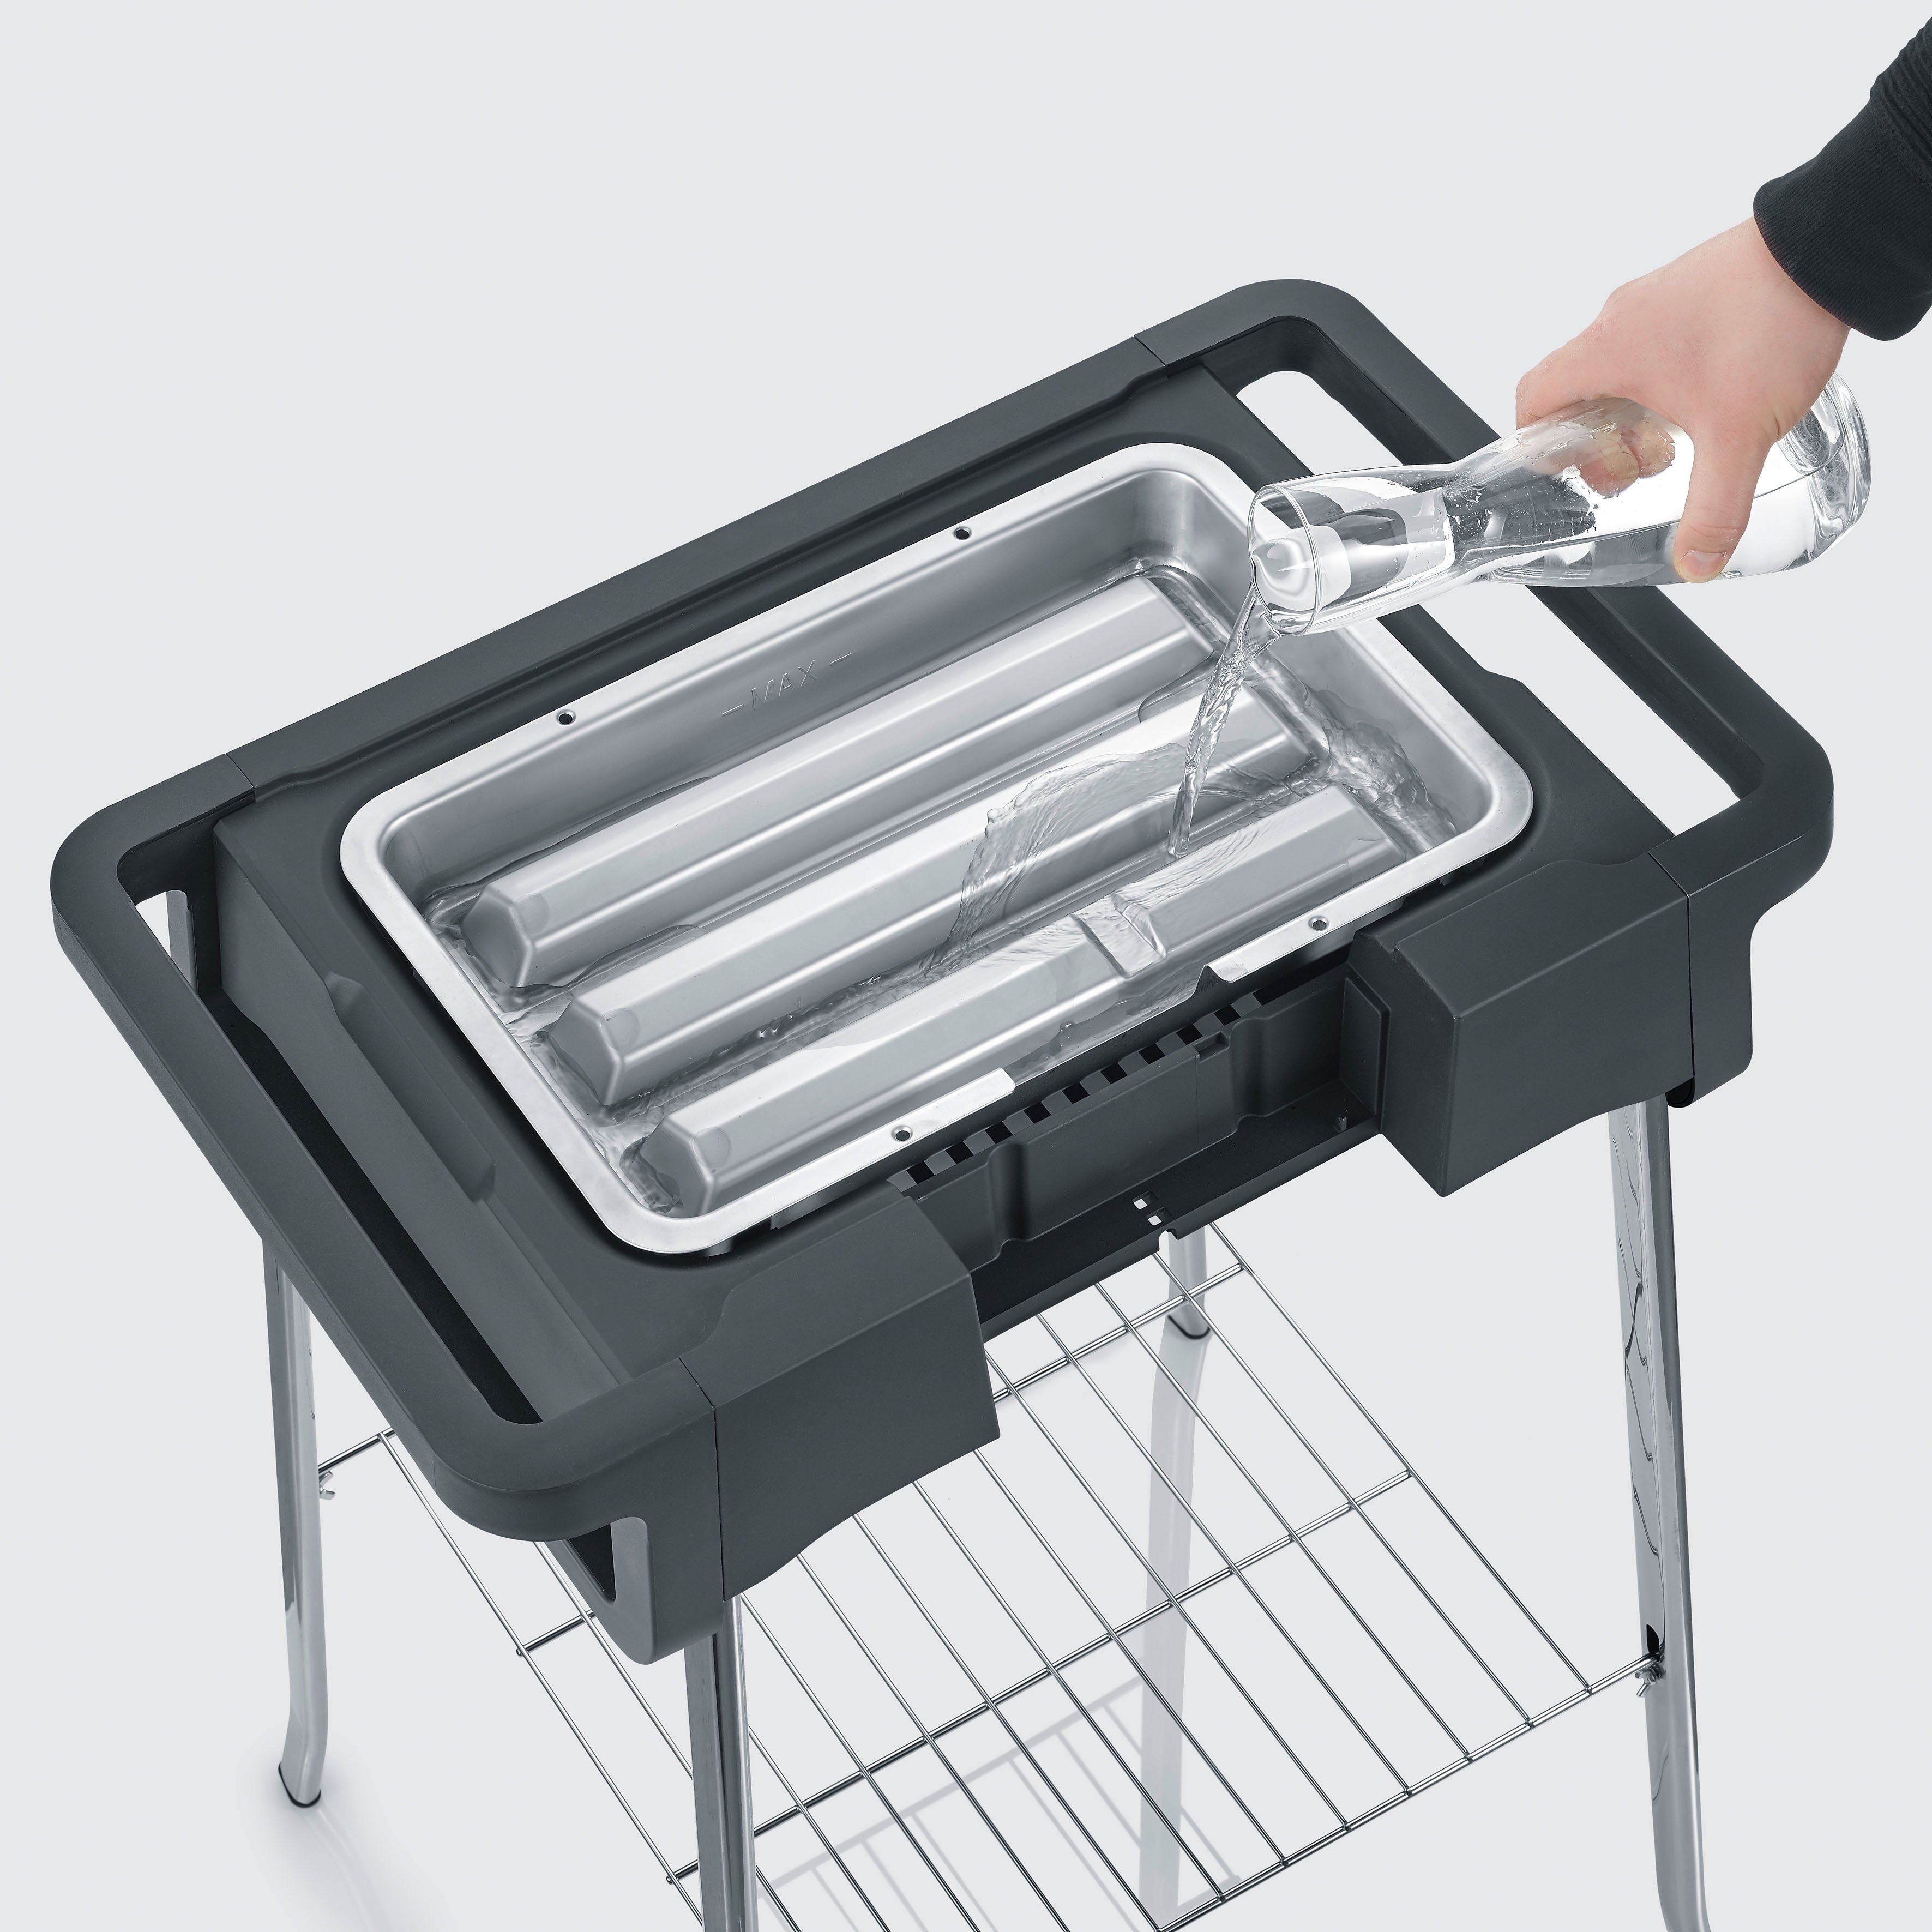 W PG S, EVO 2500 8124 Standgrill Severin STYLE